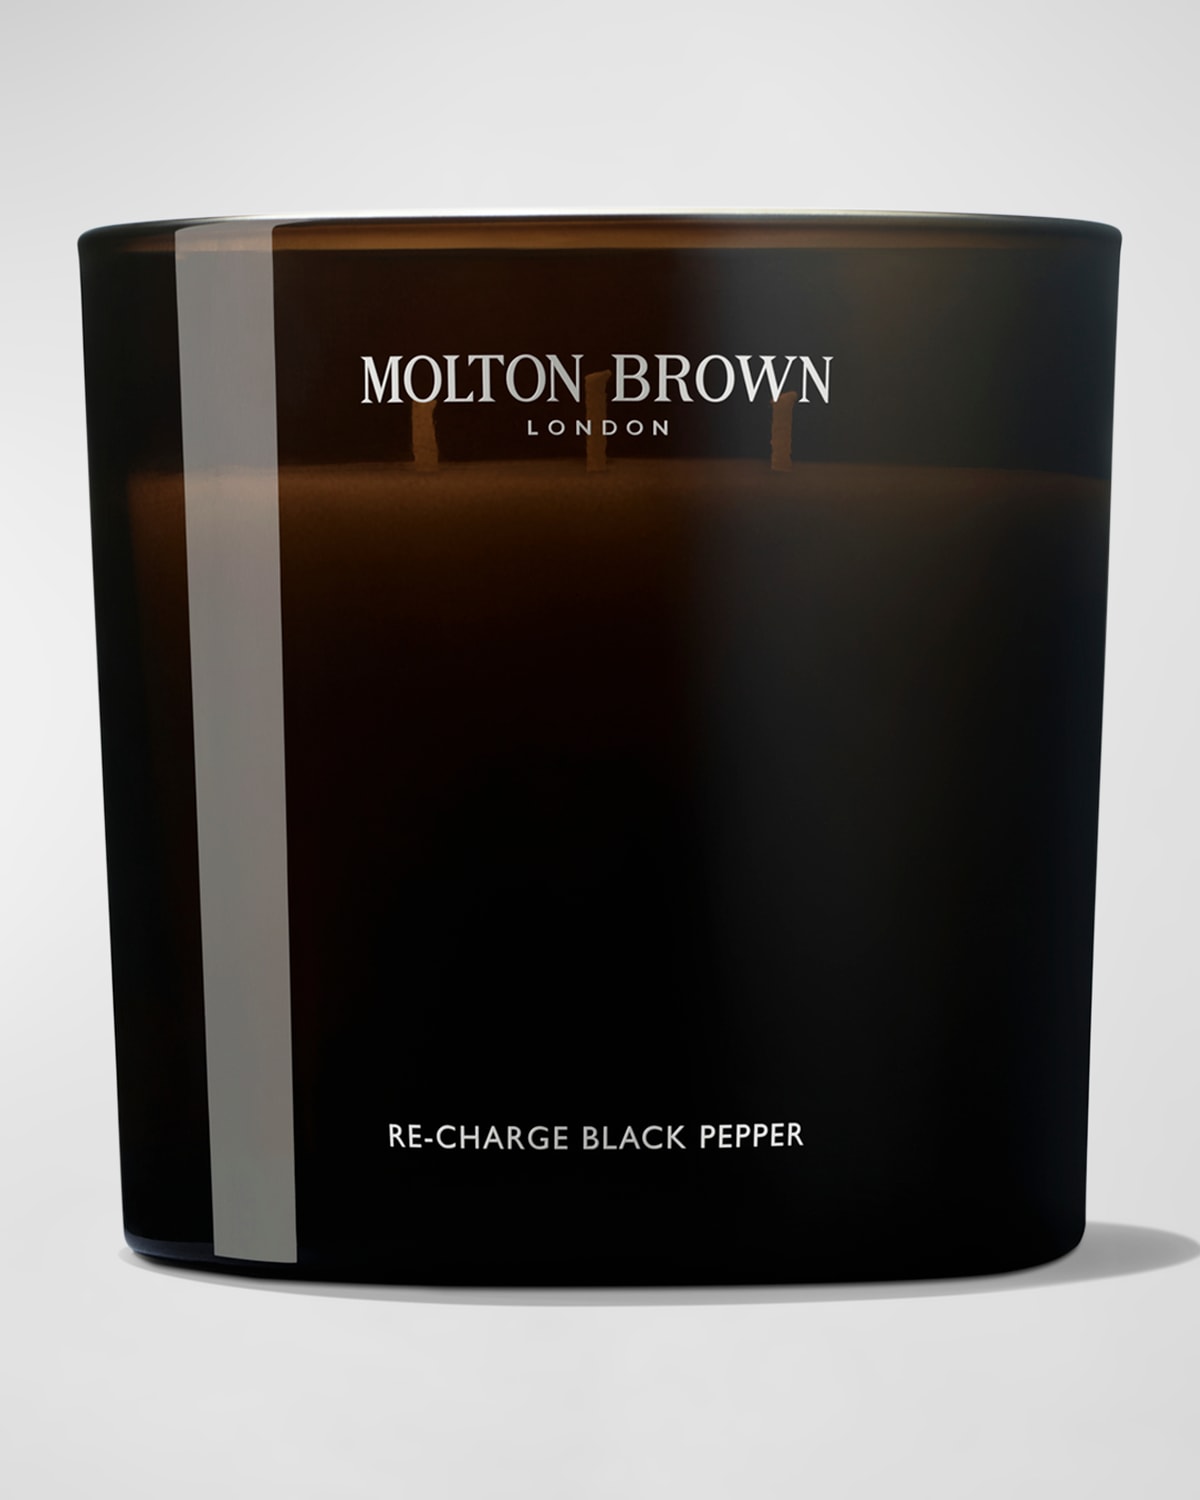 Molton Brown Re-charge Black Pepper Luxury Scented 3-wick Candle, 21.16 Oz.